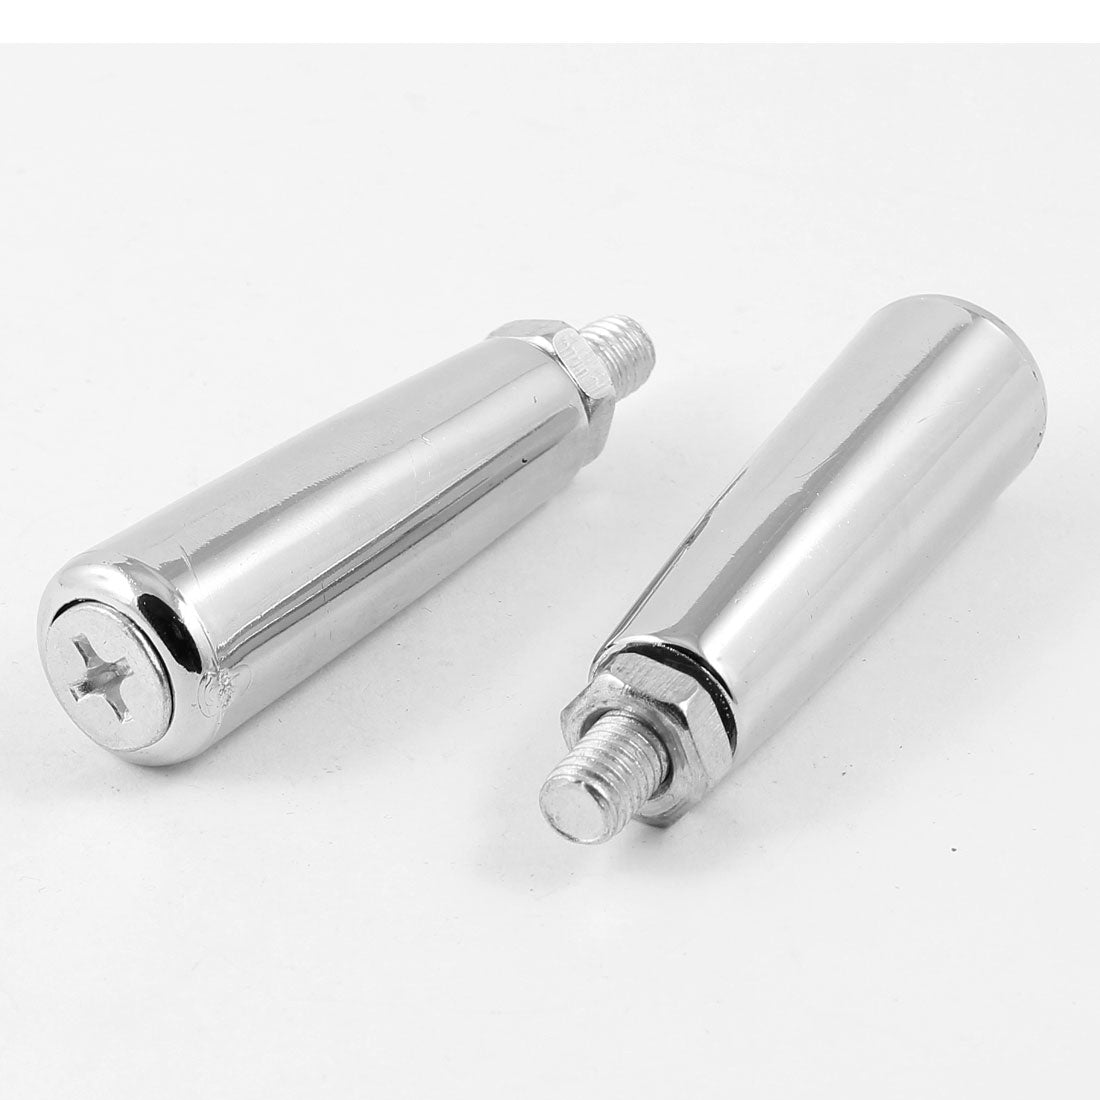 uxcell Uxcell 2 PCS Silver Tone Metal M8 Thread Revolving Handle for Grinder